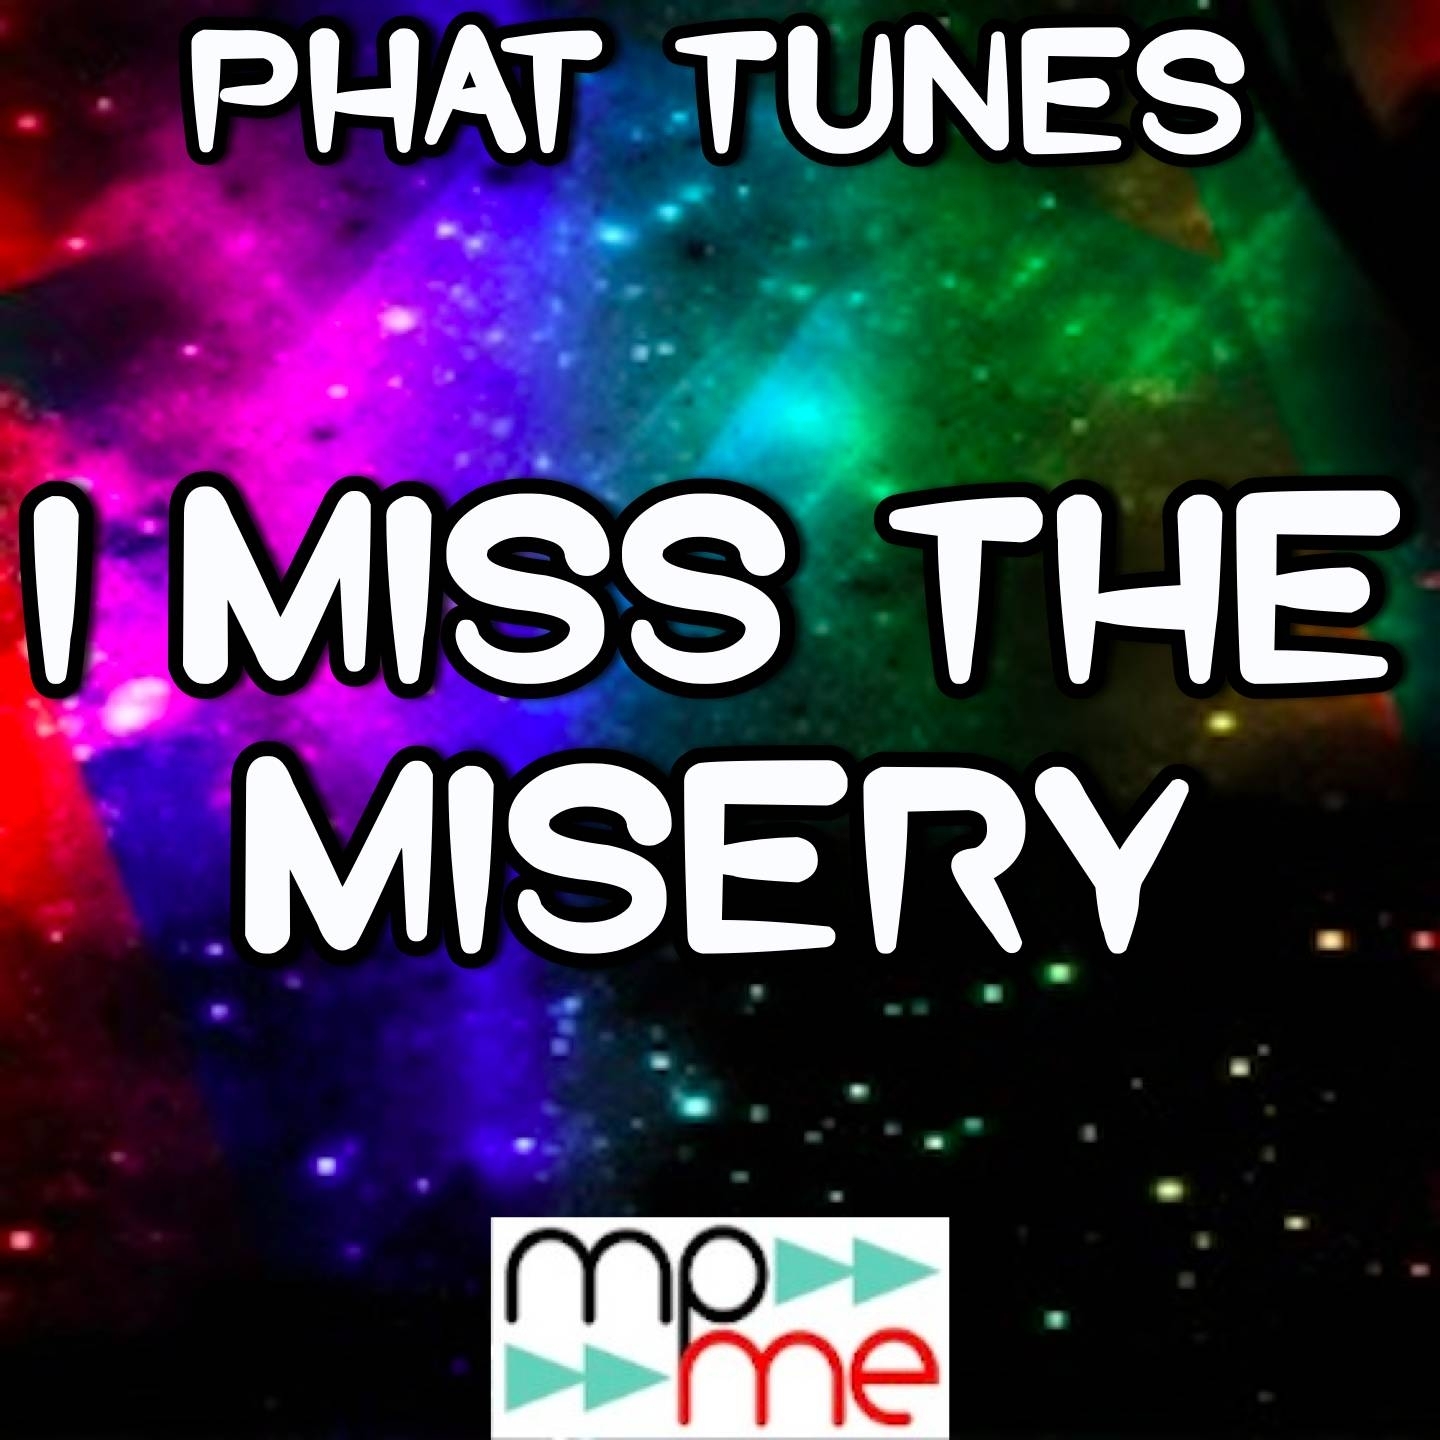 I Miss the Misery (A Tribute to Halestorm)